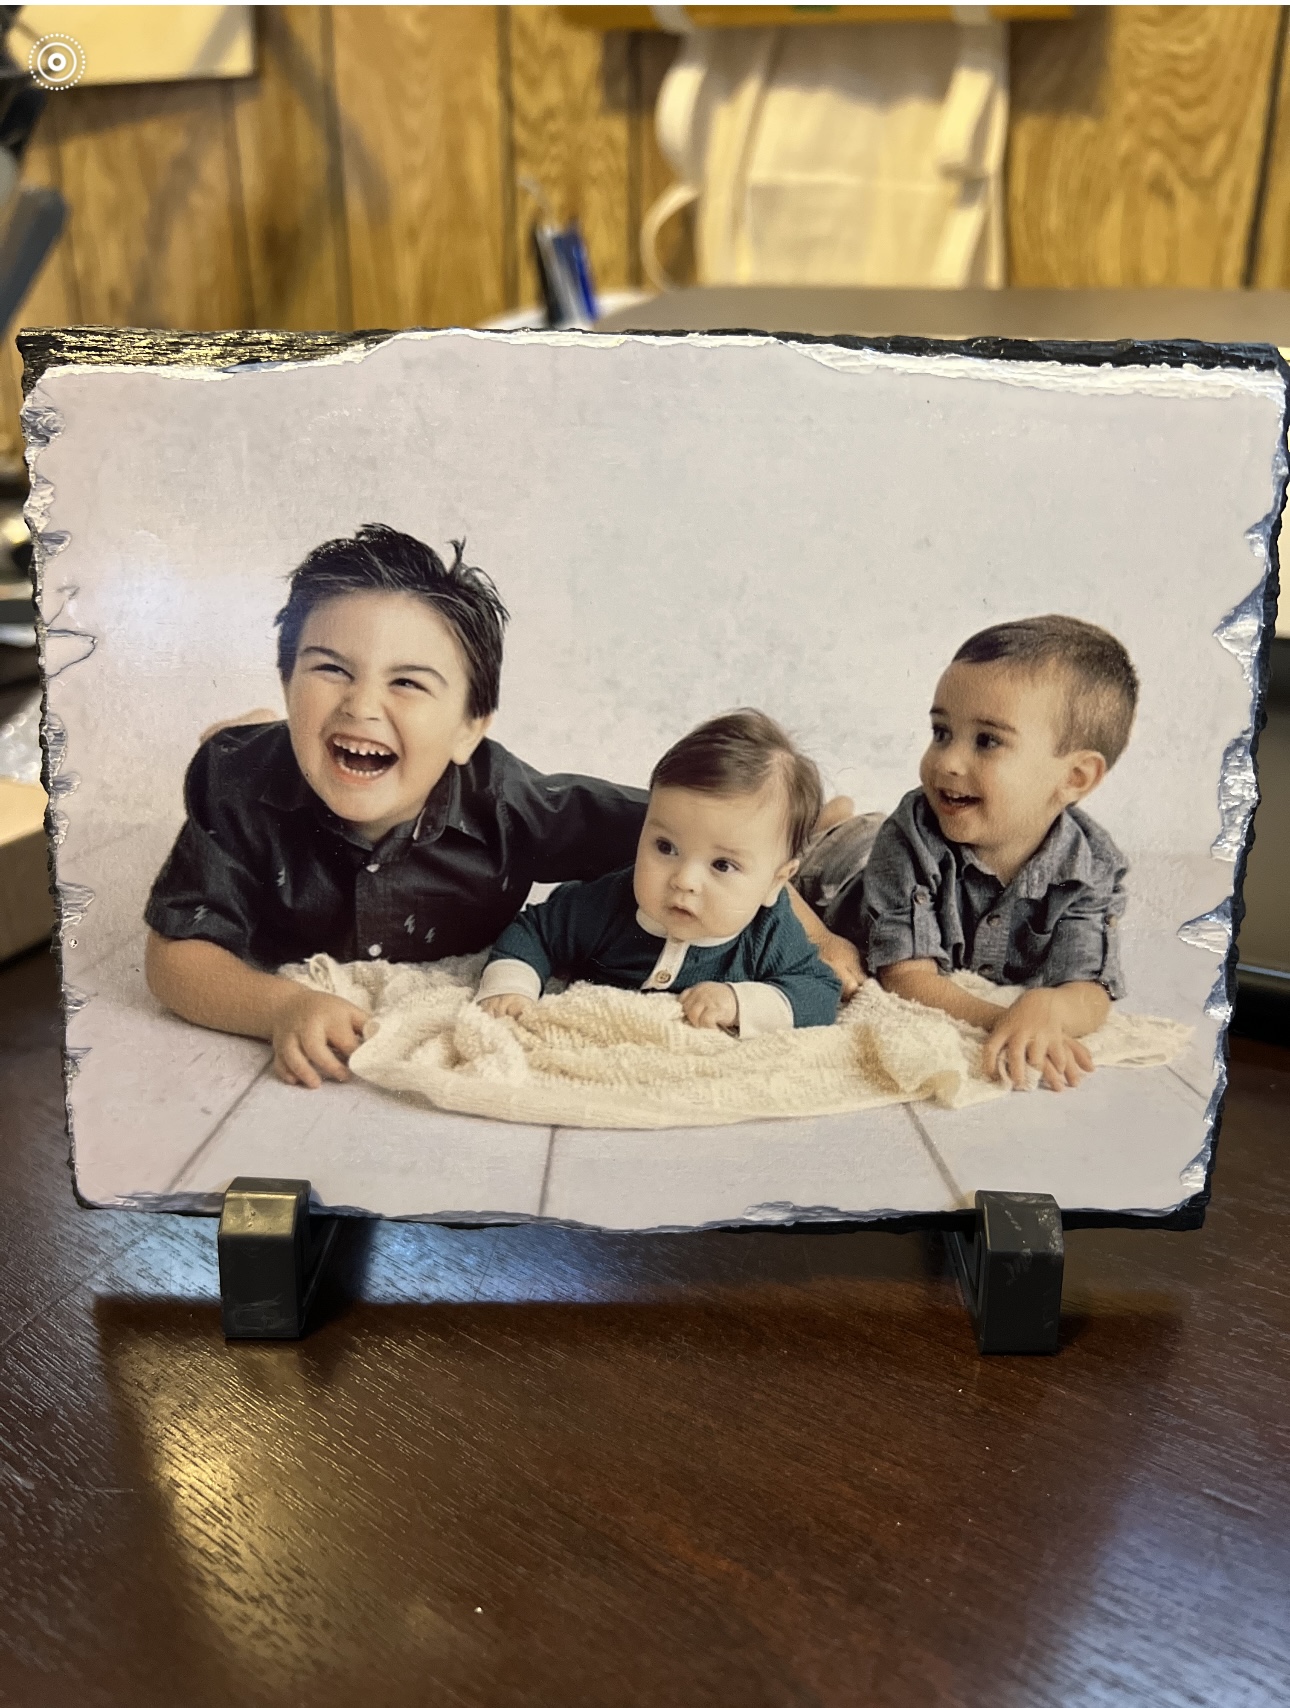 Family fun made with sublimation printing